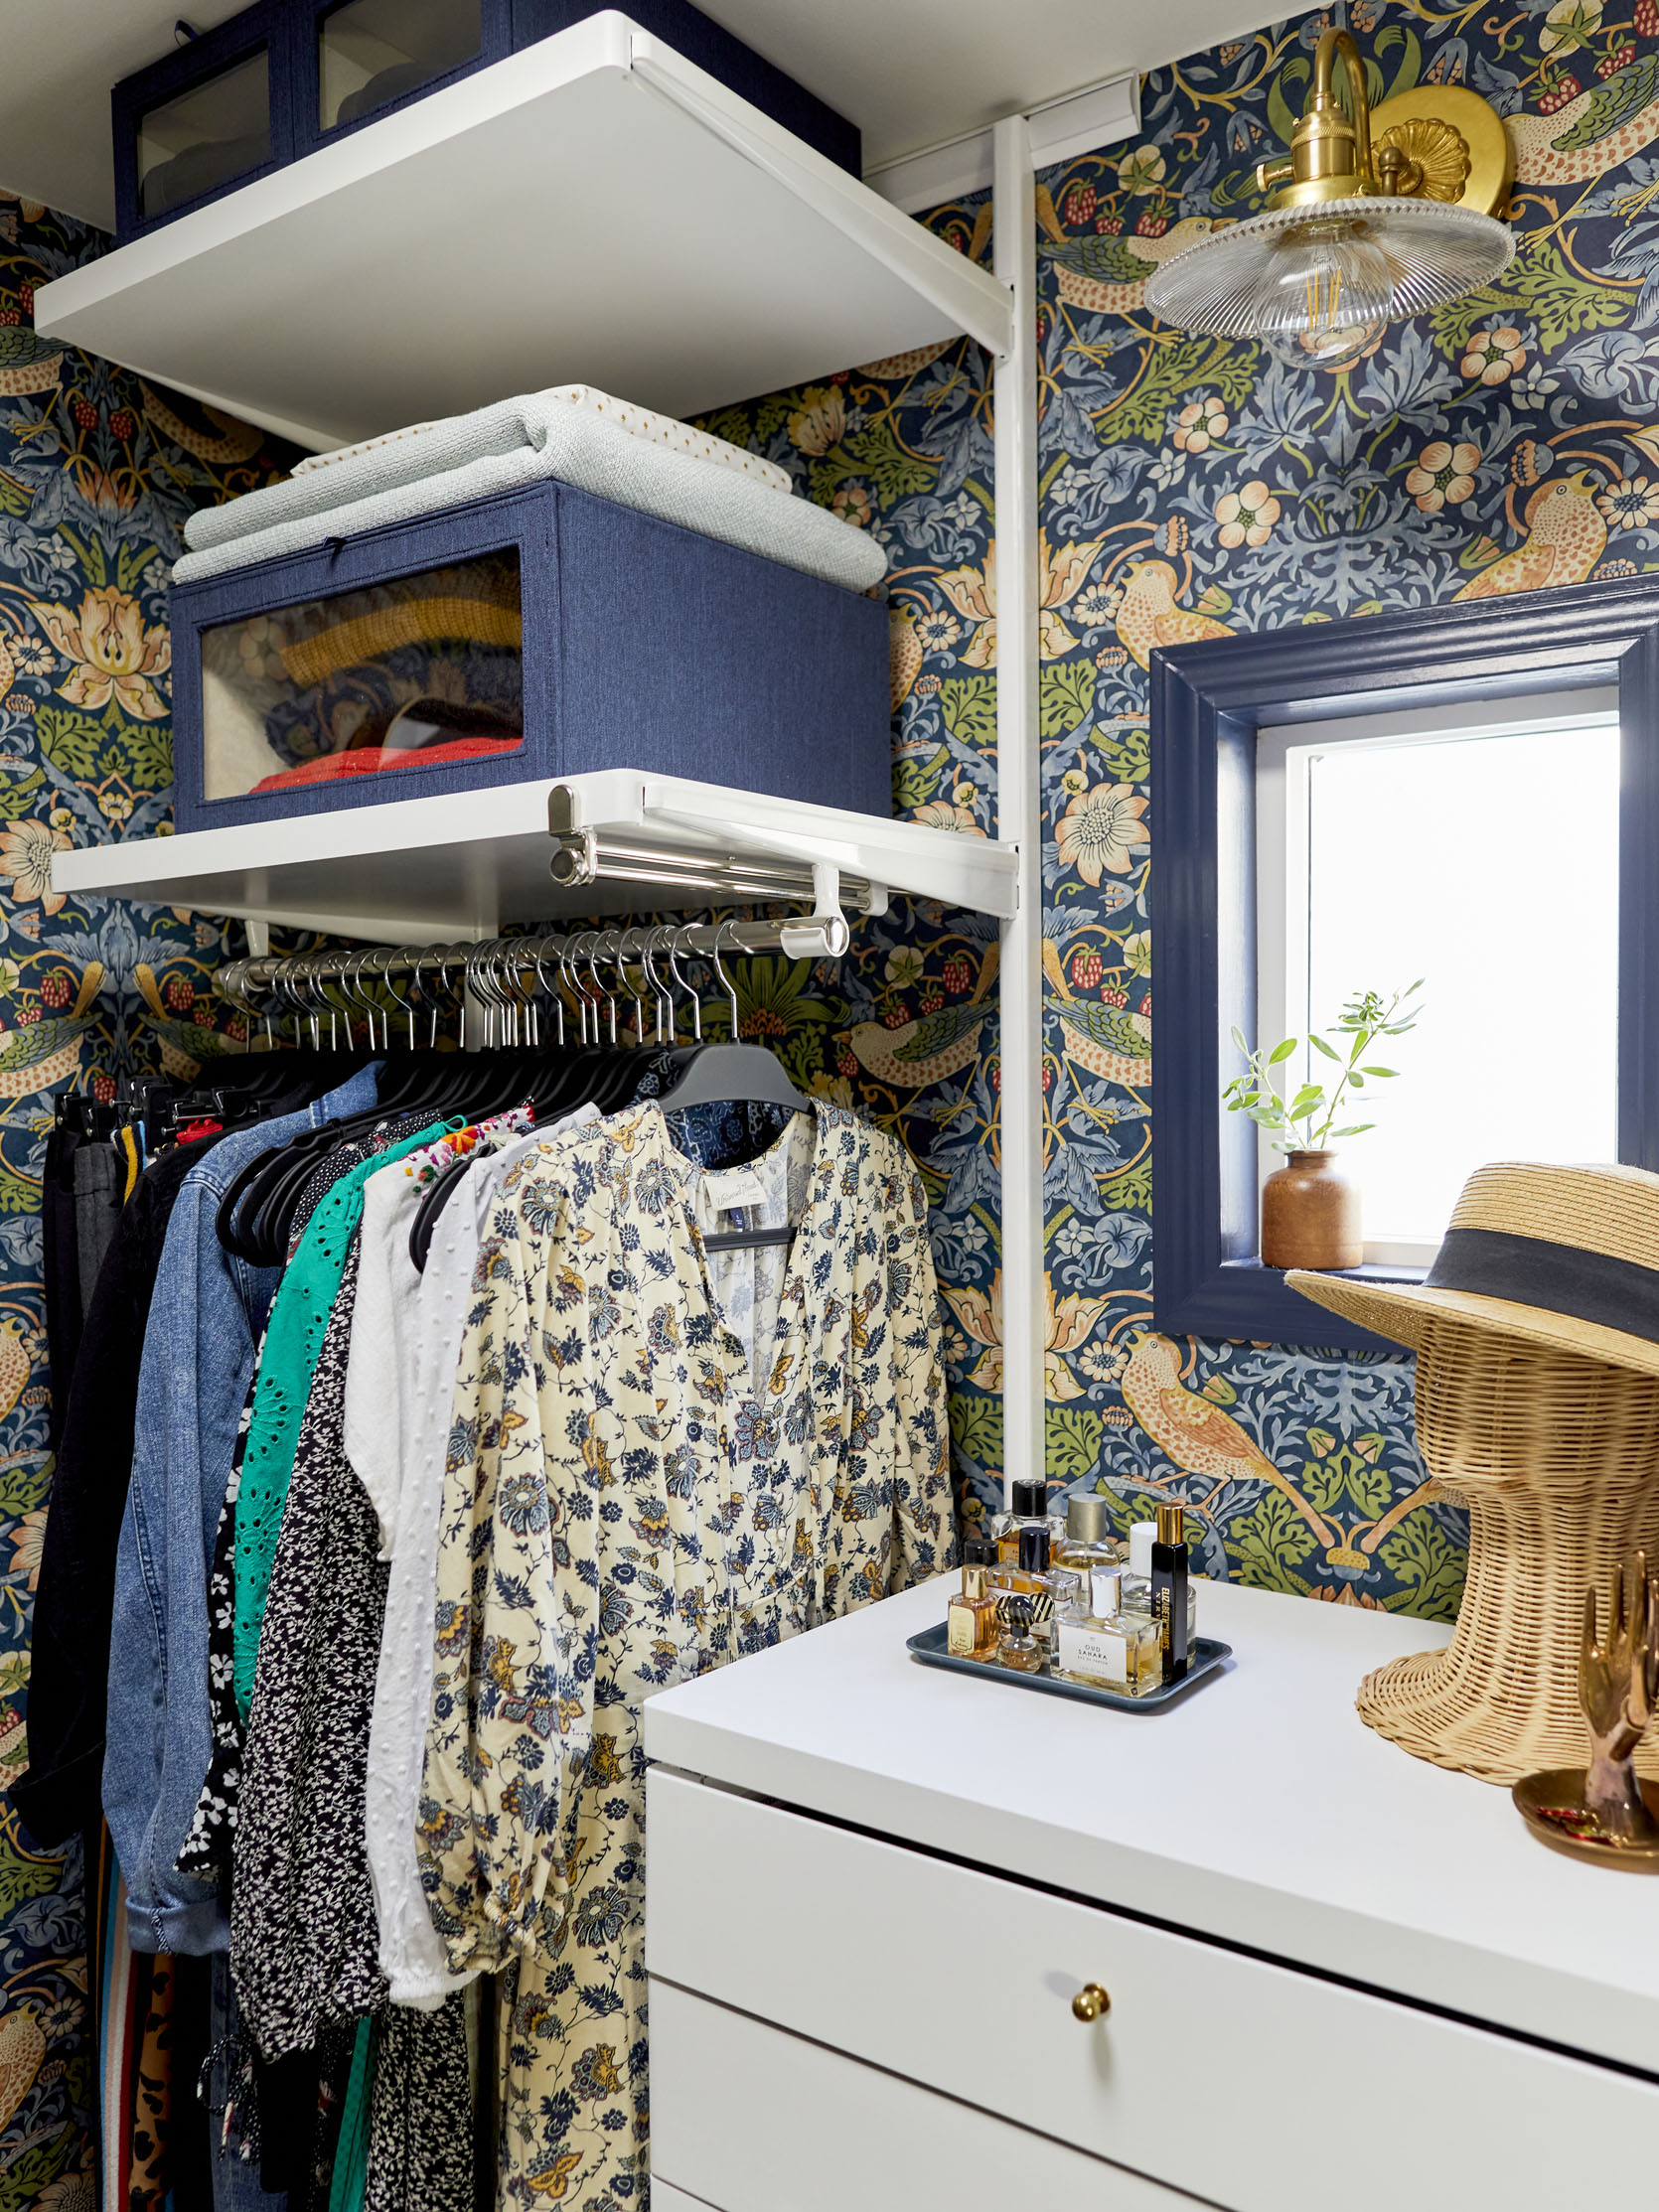 Sara'S Primary Closet Reveal - The Bold Design Moment She'S Been Craving